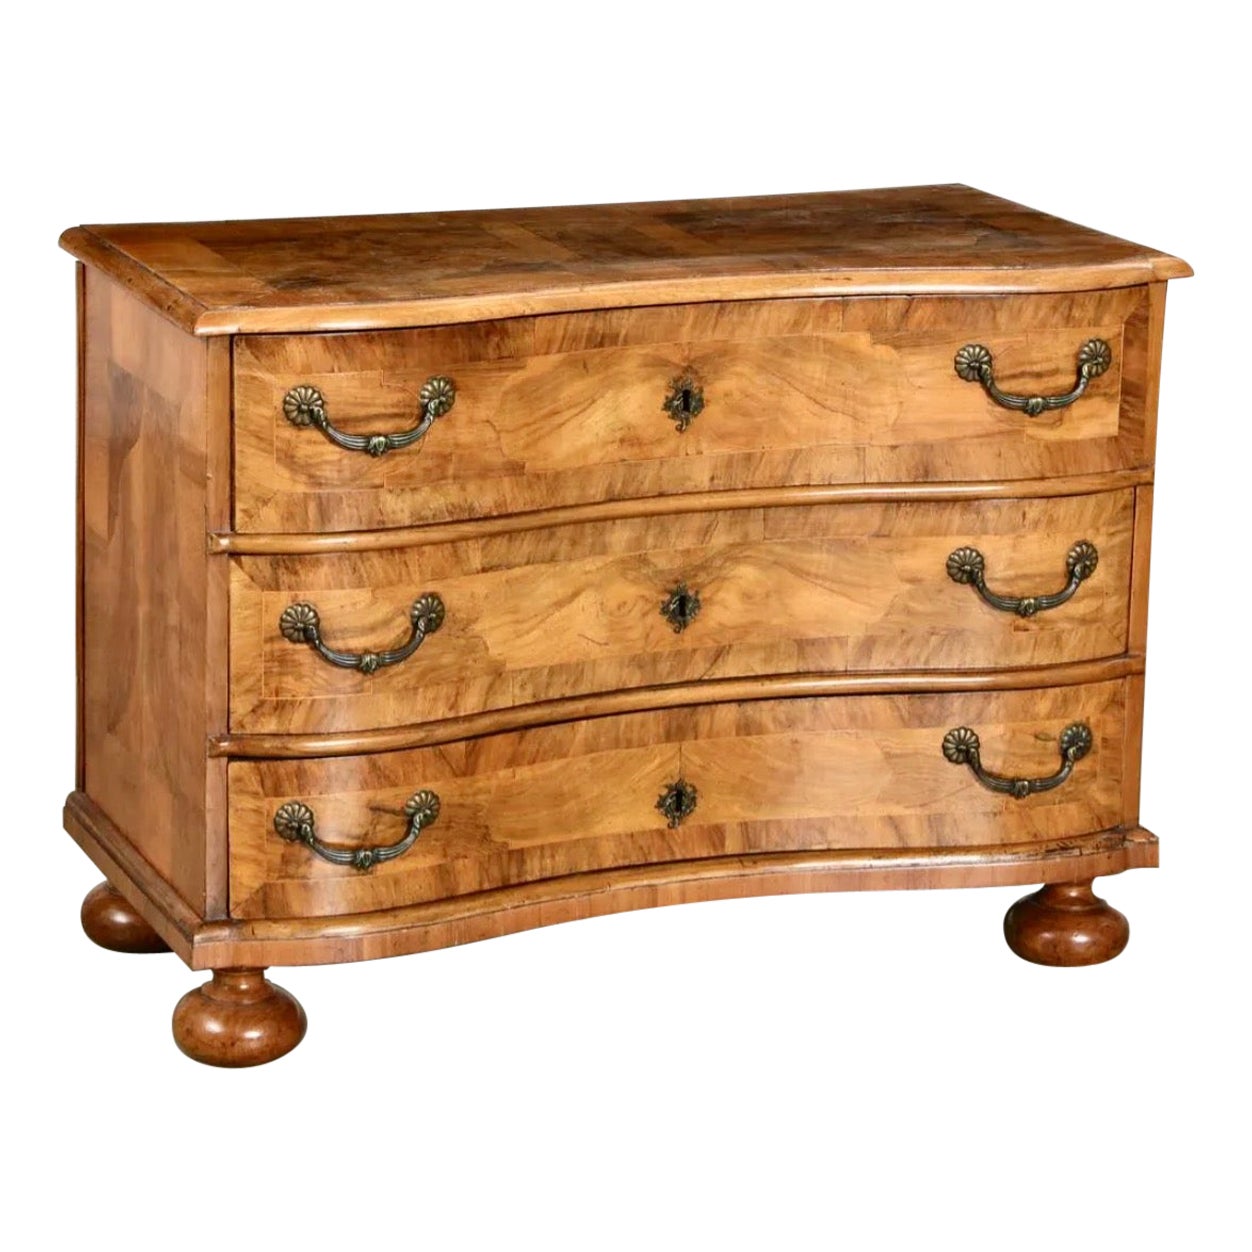 German Baroque Chest of Drawers